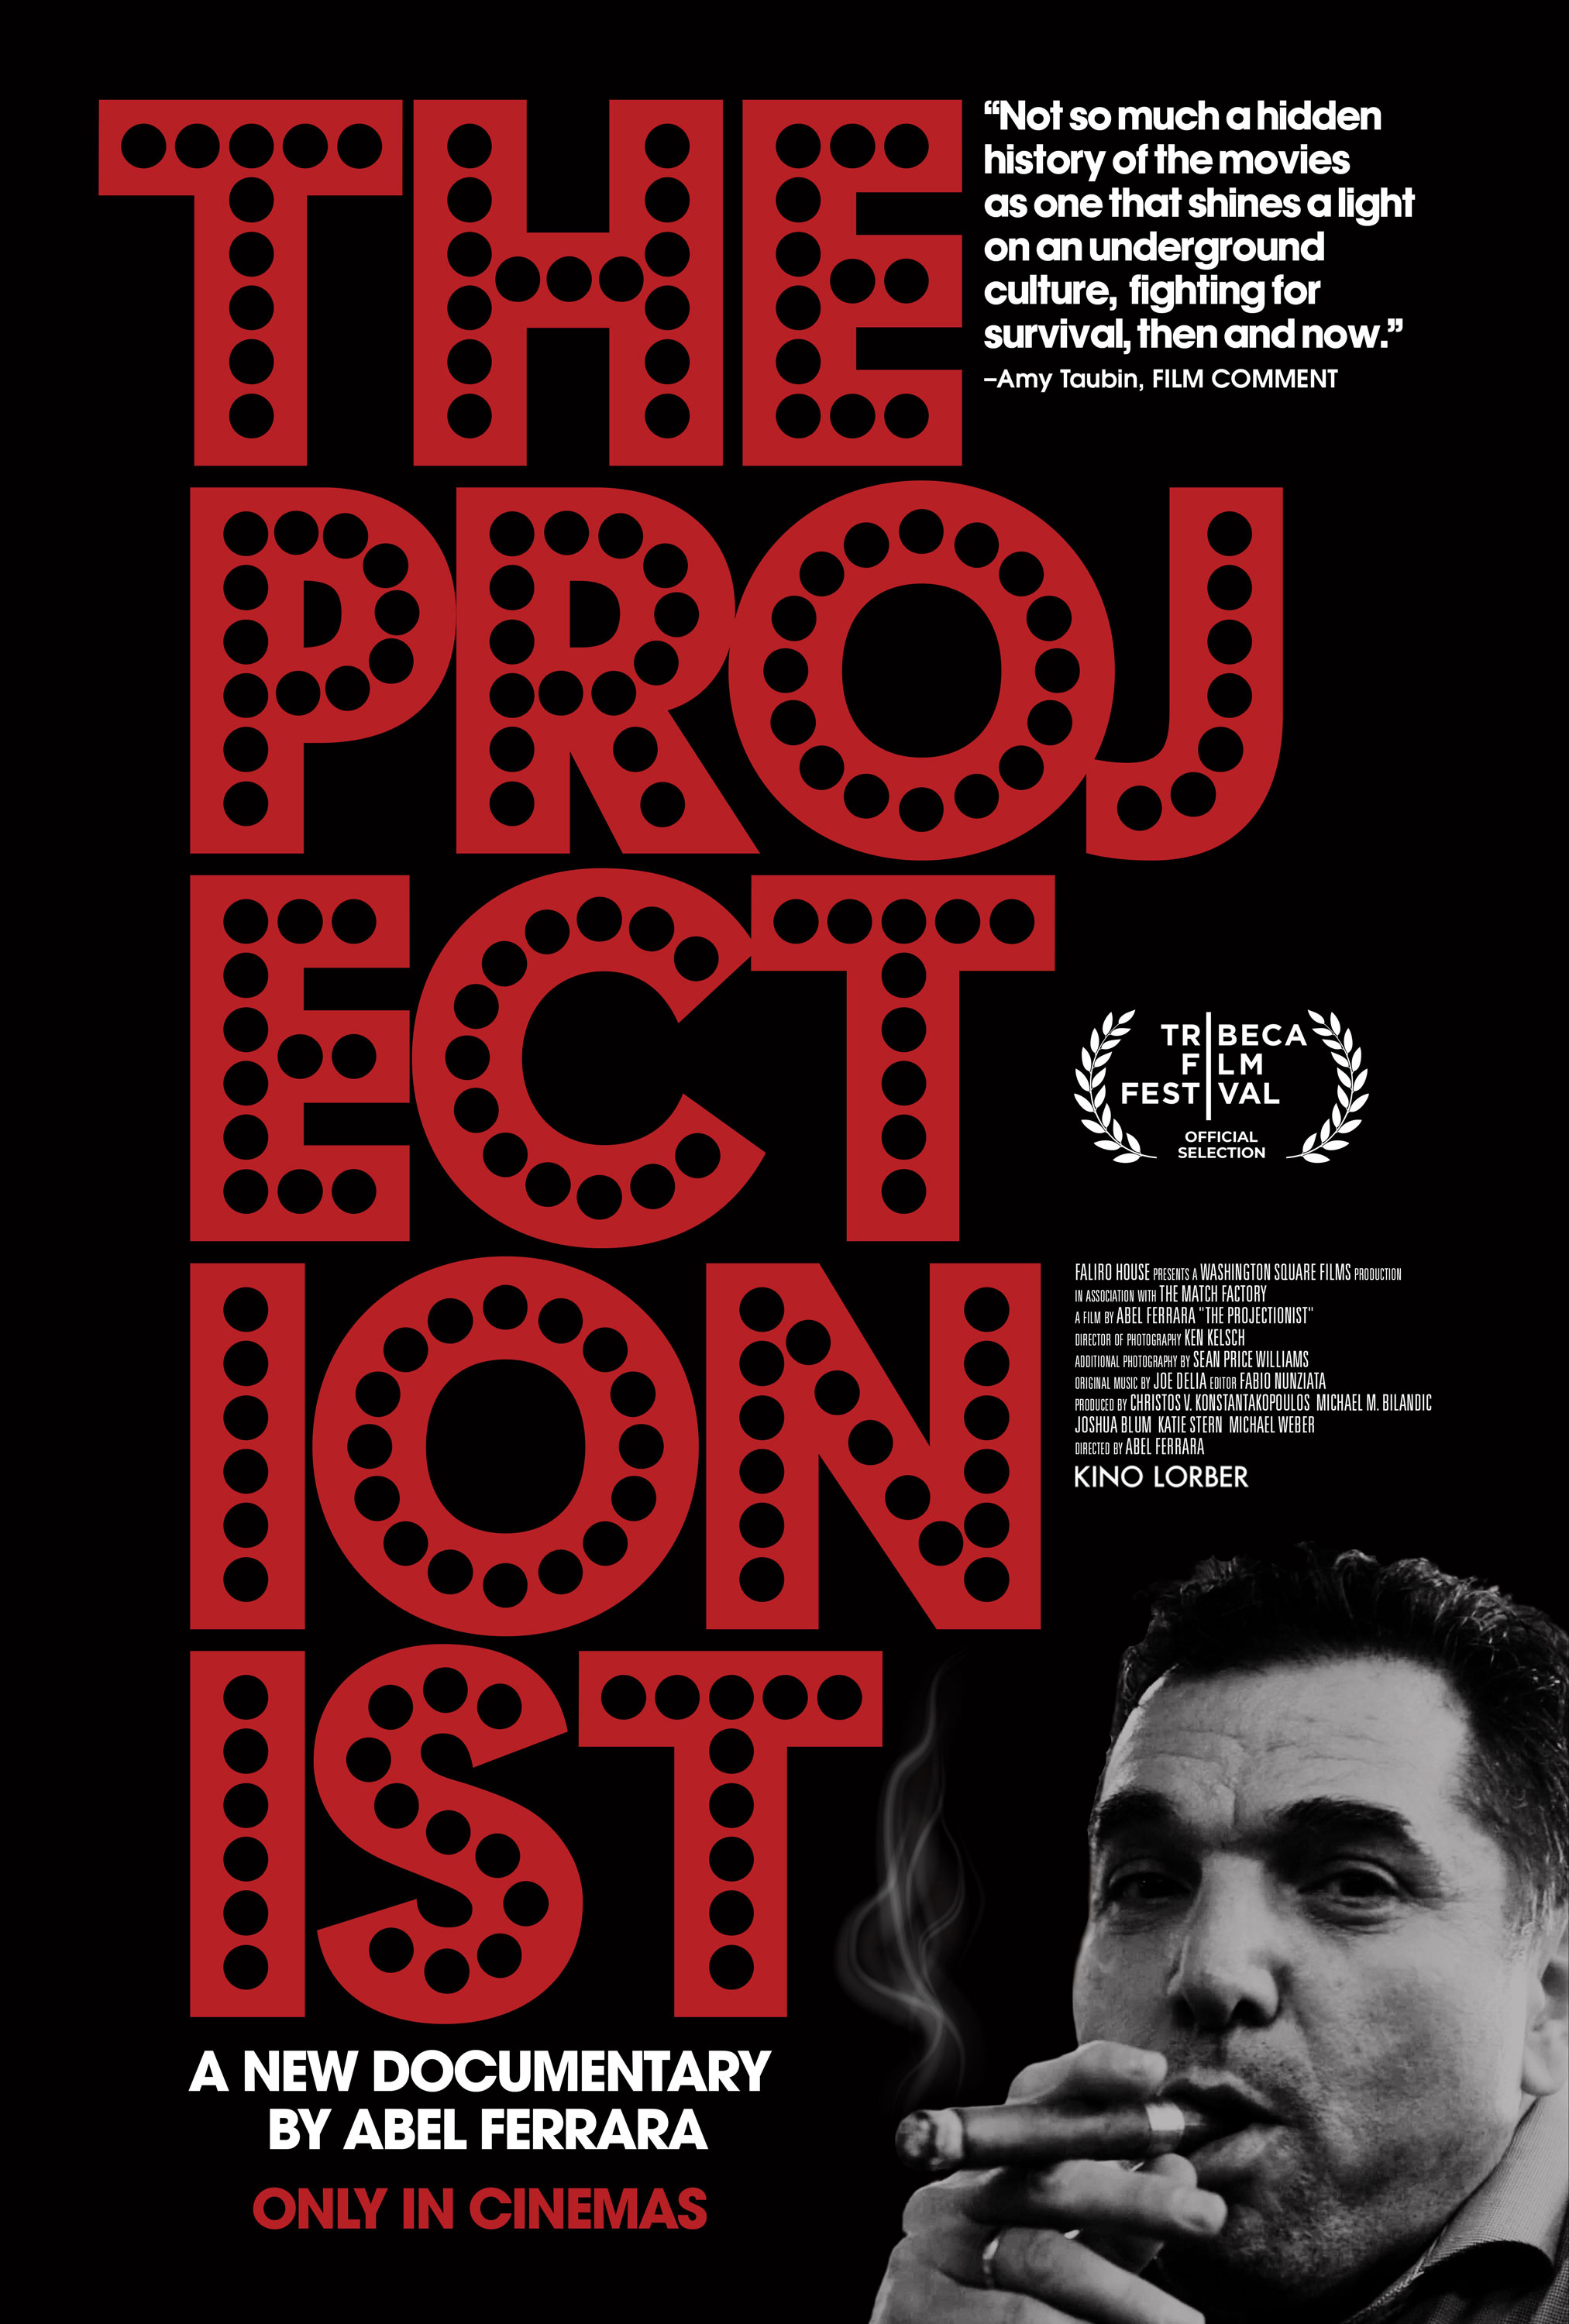 The Projectionist (2019) Screenshot 2